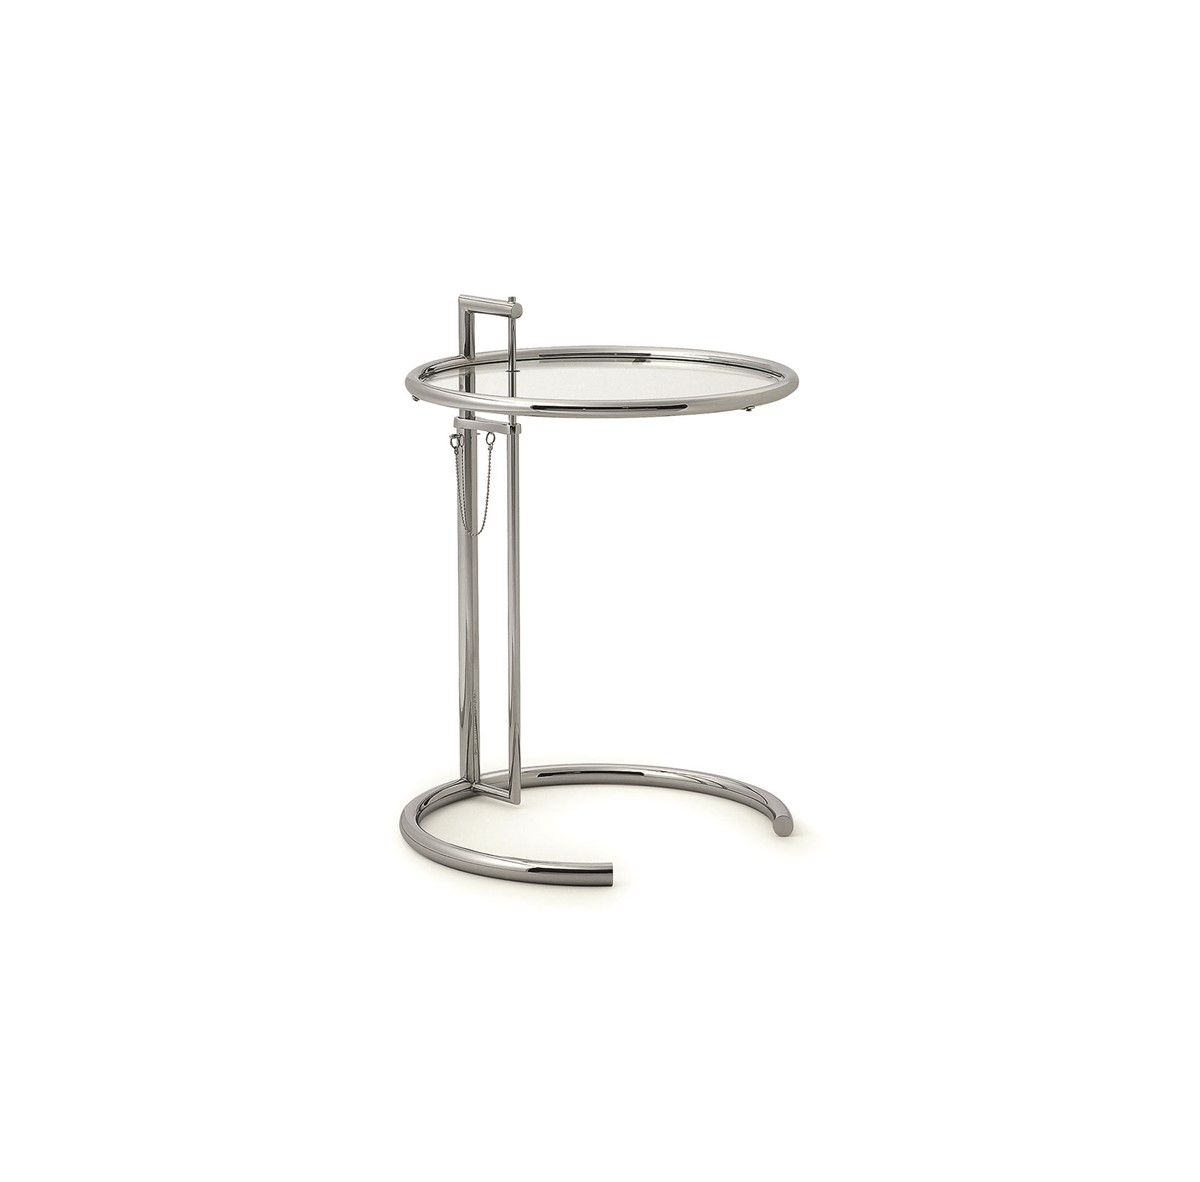 ClassiconAdjustable Table Stainless